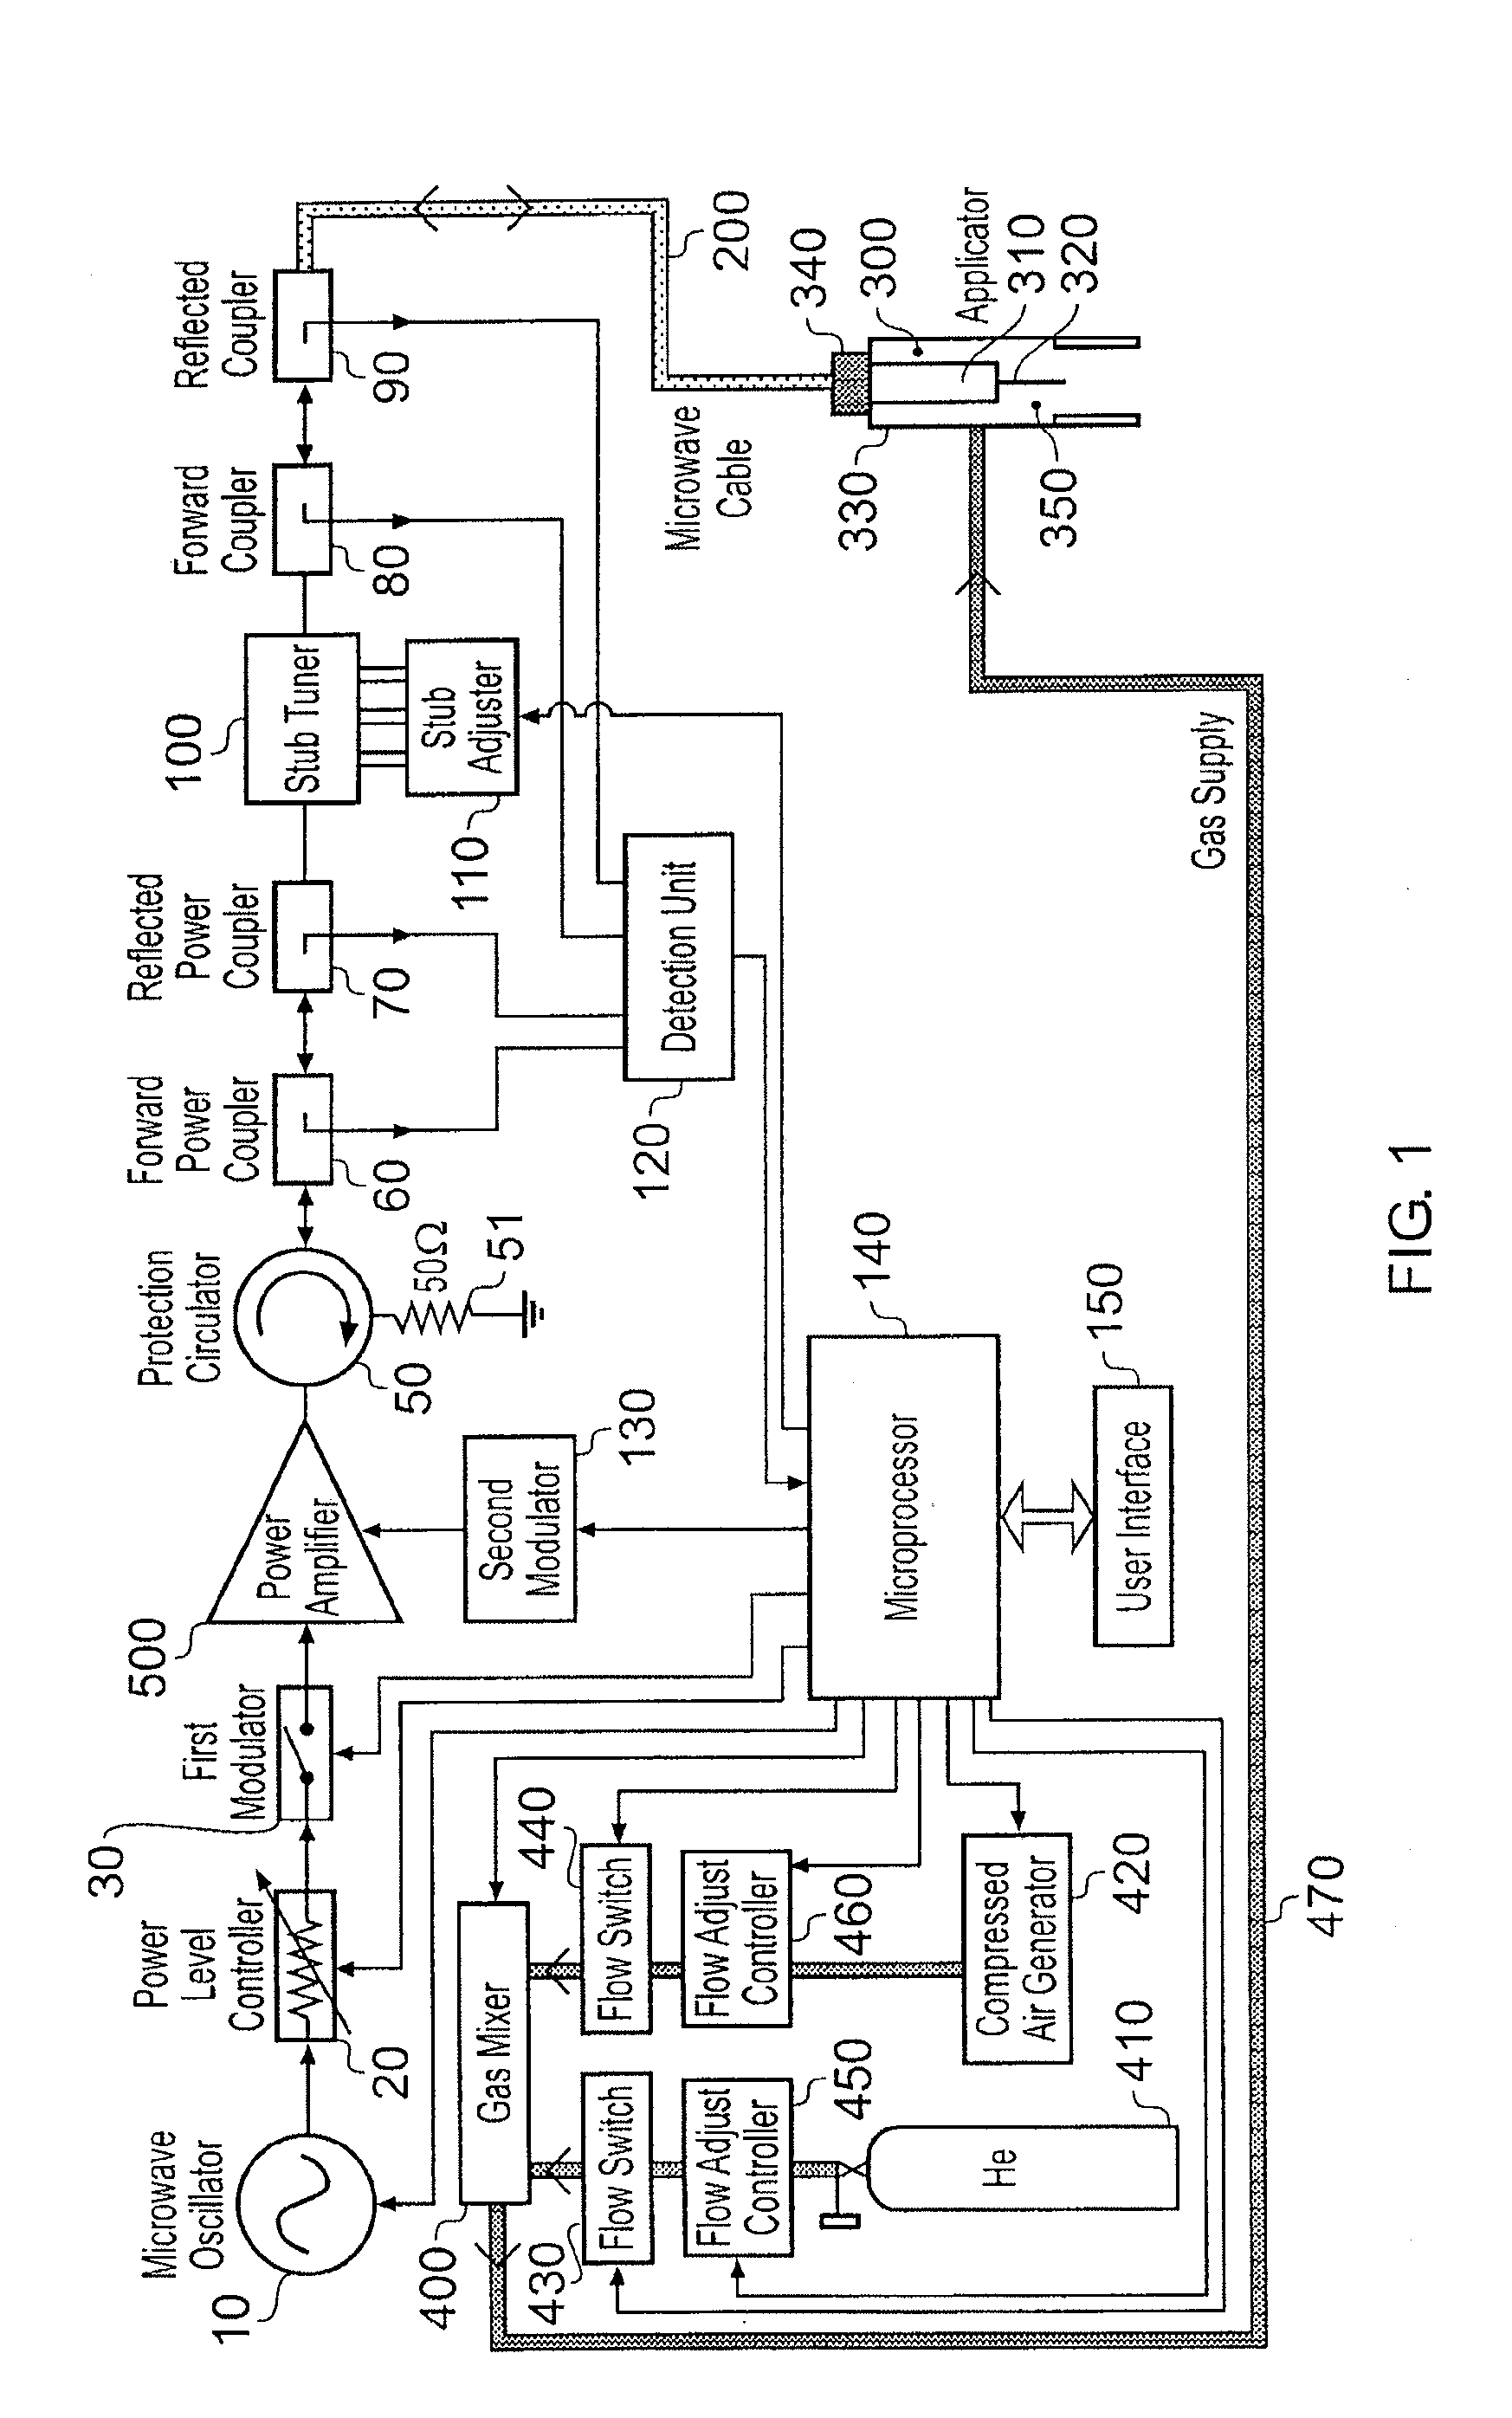 Microwave plasma sterilisation system and applicators therefor